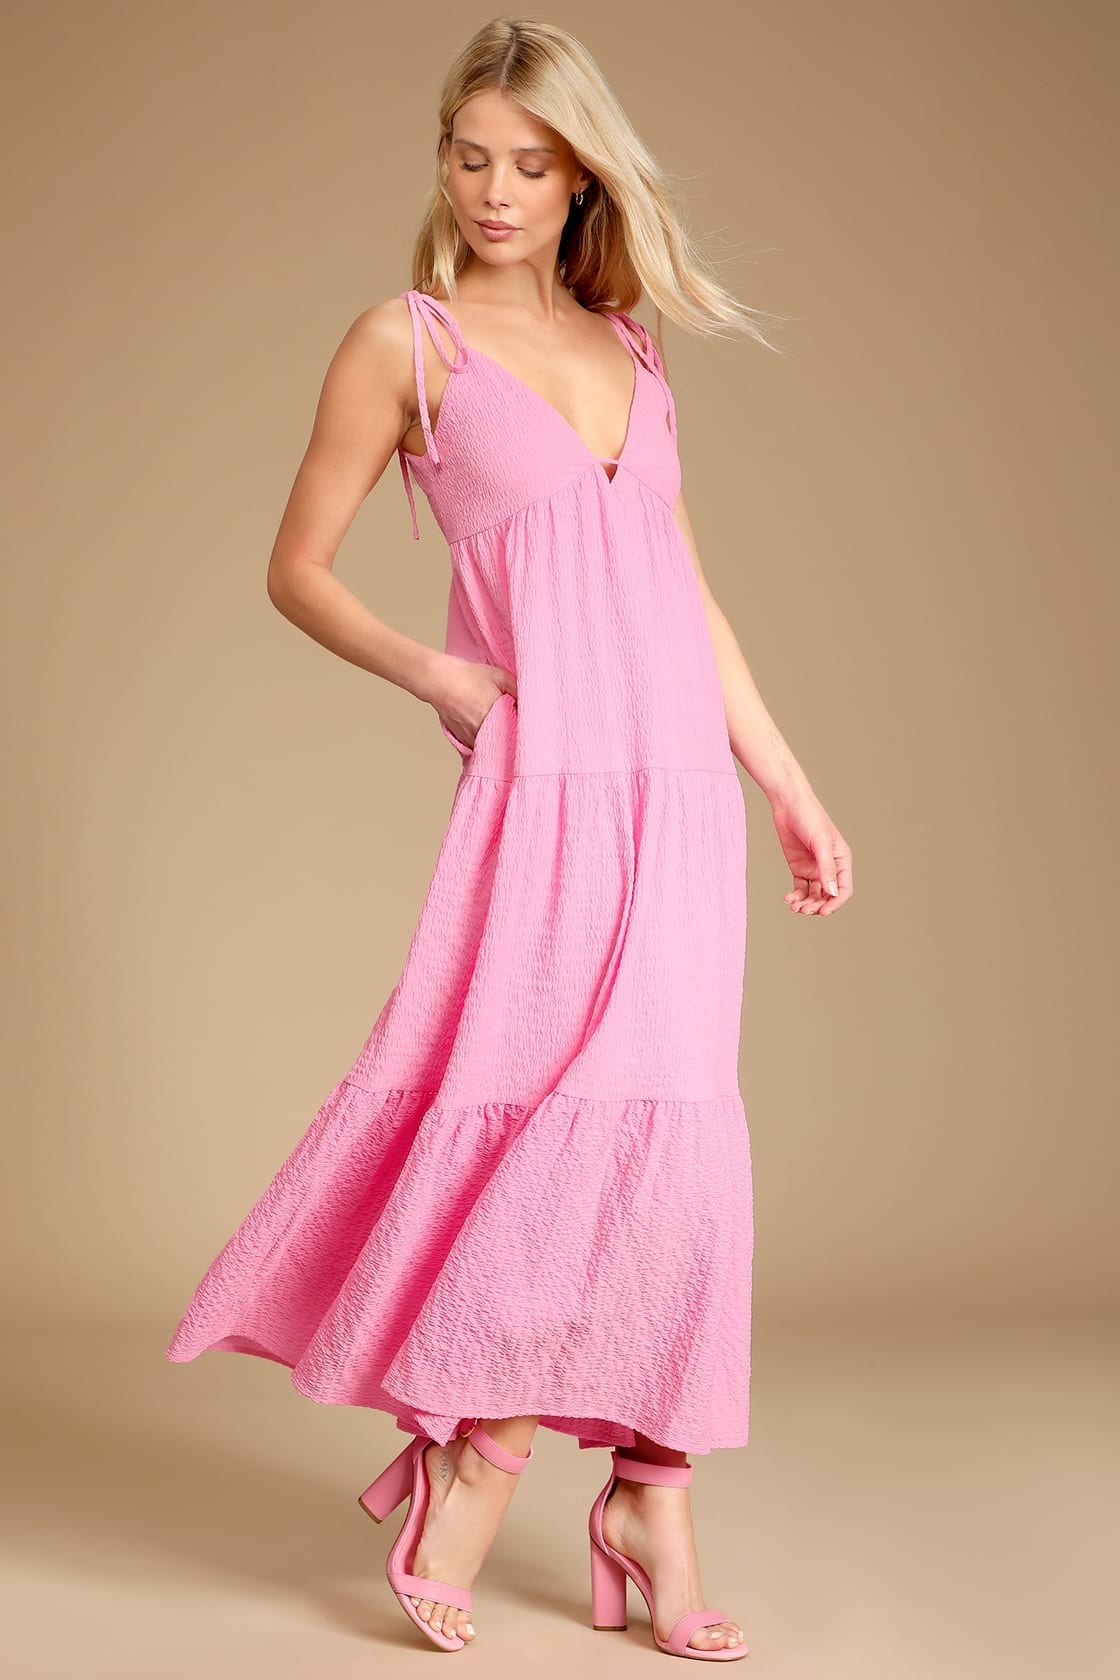 a model wearing the dress in pink